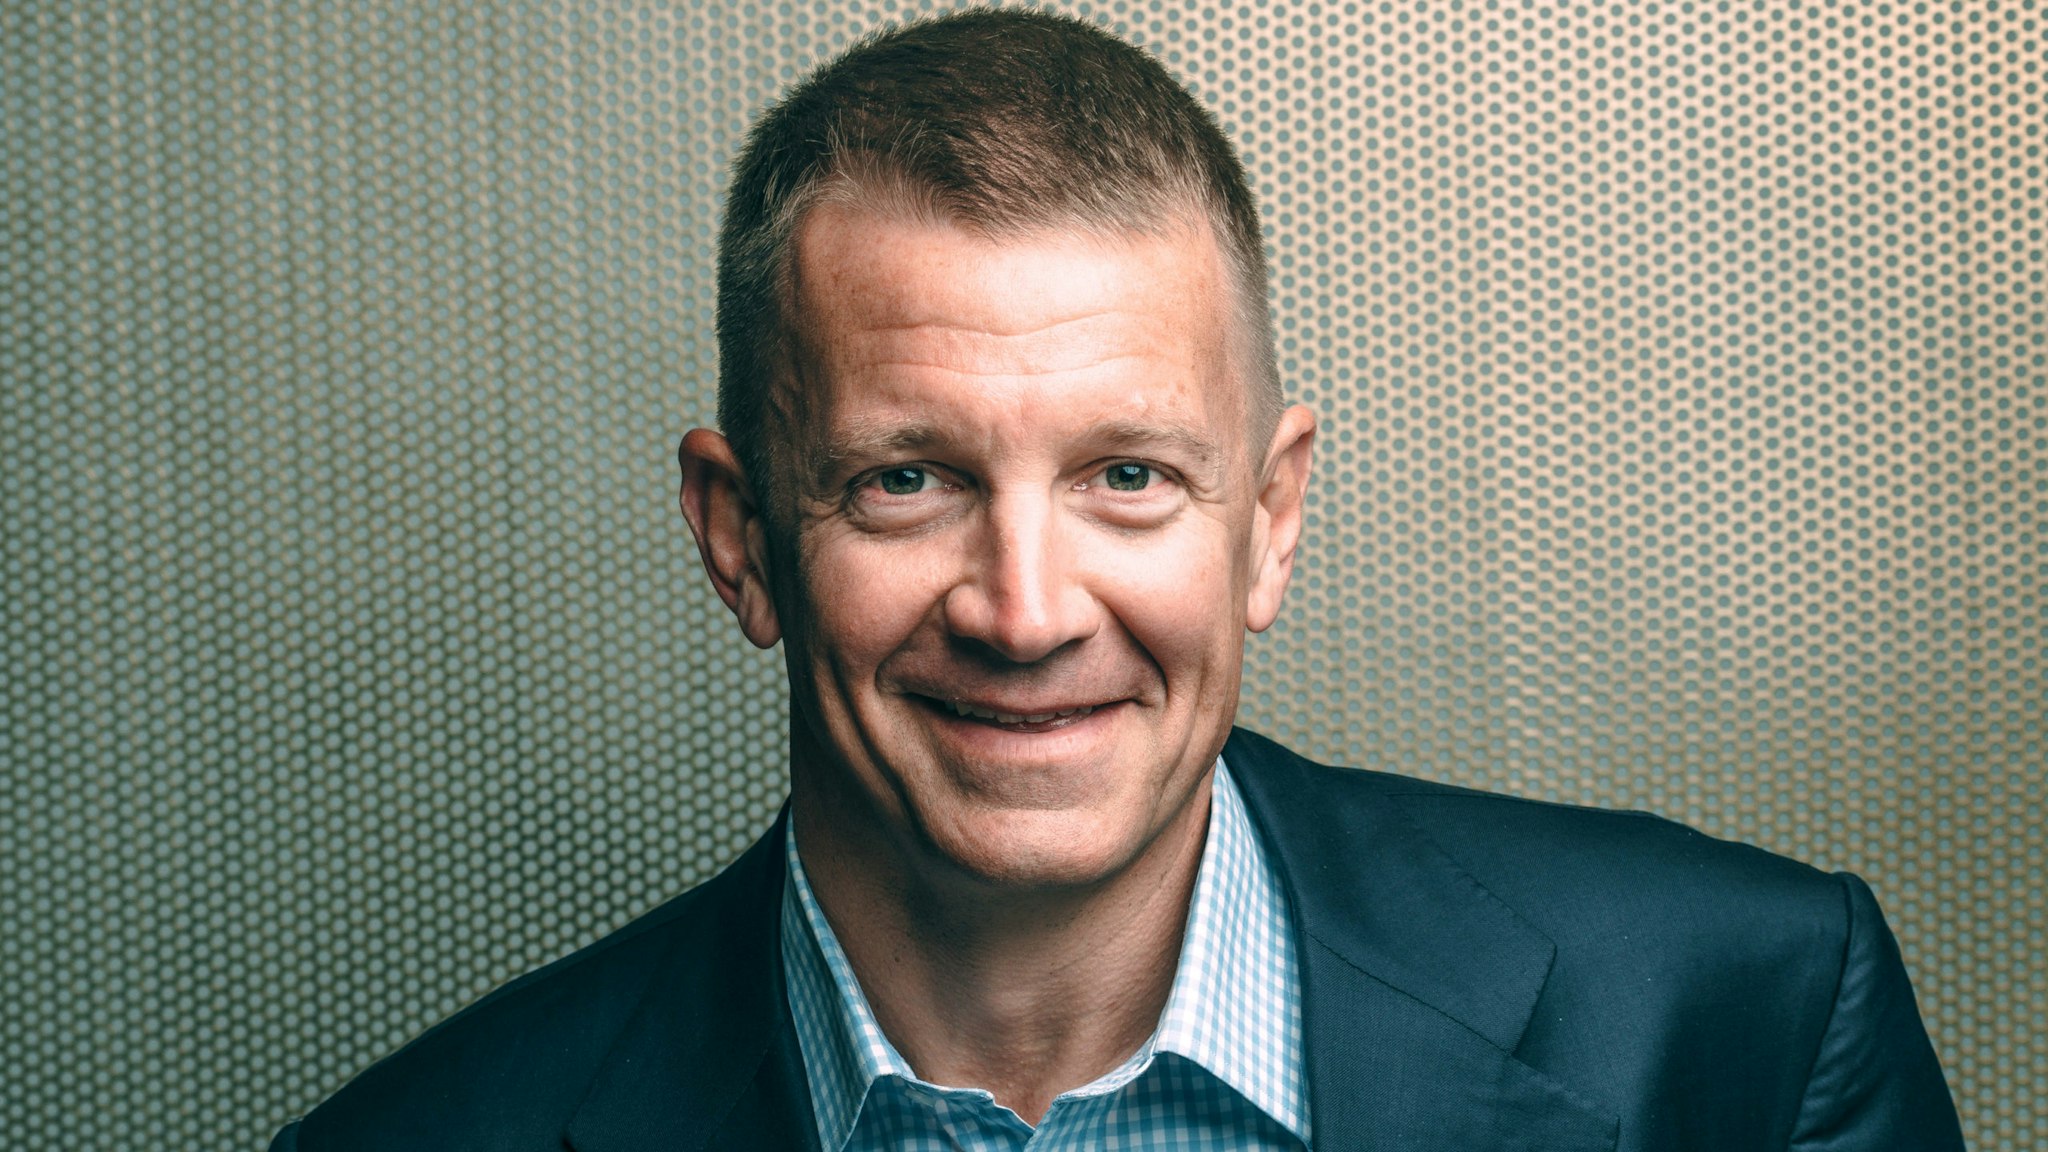 Erik Prince, chairman of Frontier Services Group Ltd., poses for a photograph in Hong Kong, China, on Thursday, March 16, 2017. A former U.S. Navy SEAL, Prince is best known for his role running Blackwater Security.